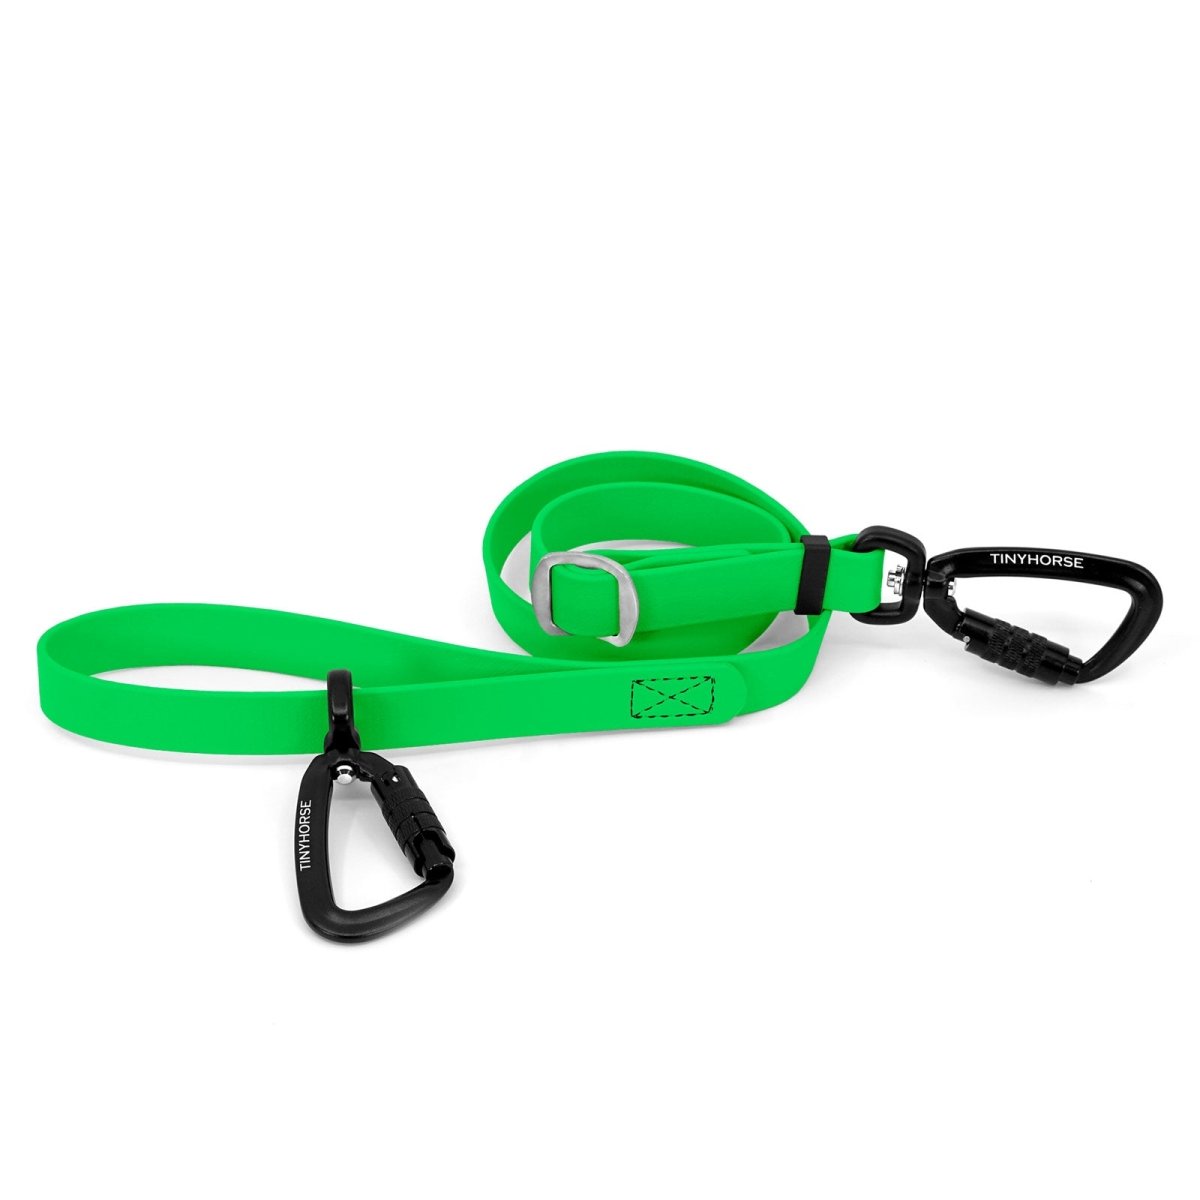 An adjustable neon green-coloured Lead-All Pro made of BioThane with 2 auto-locking carabiners